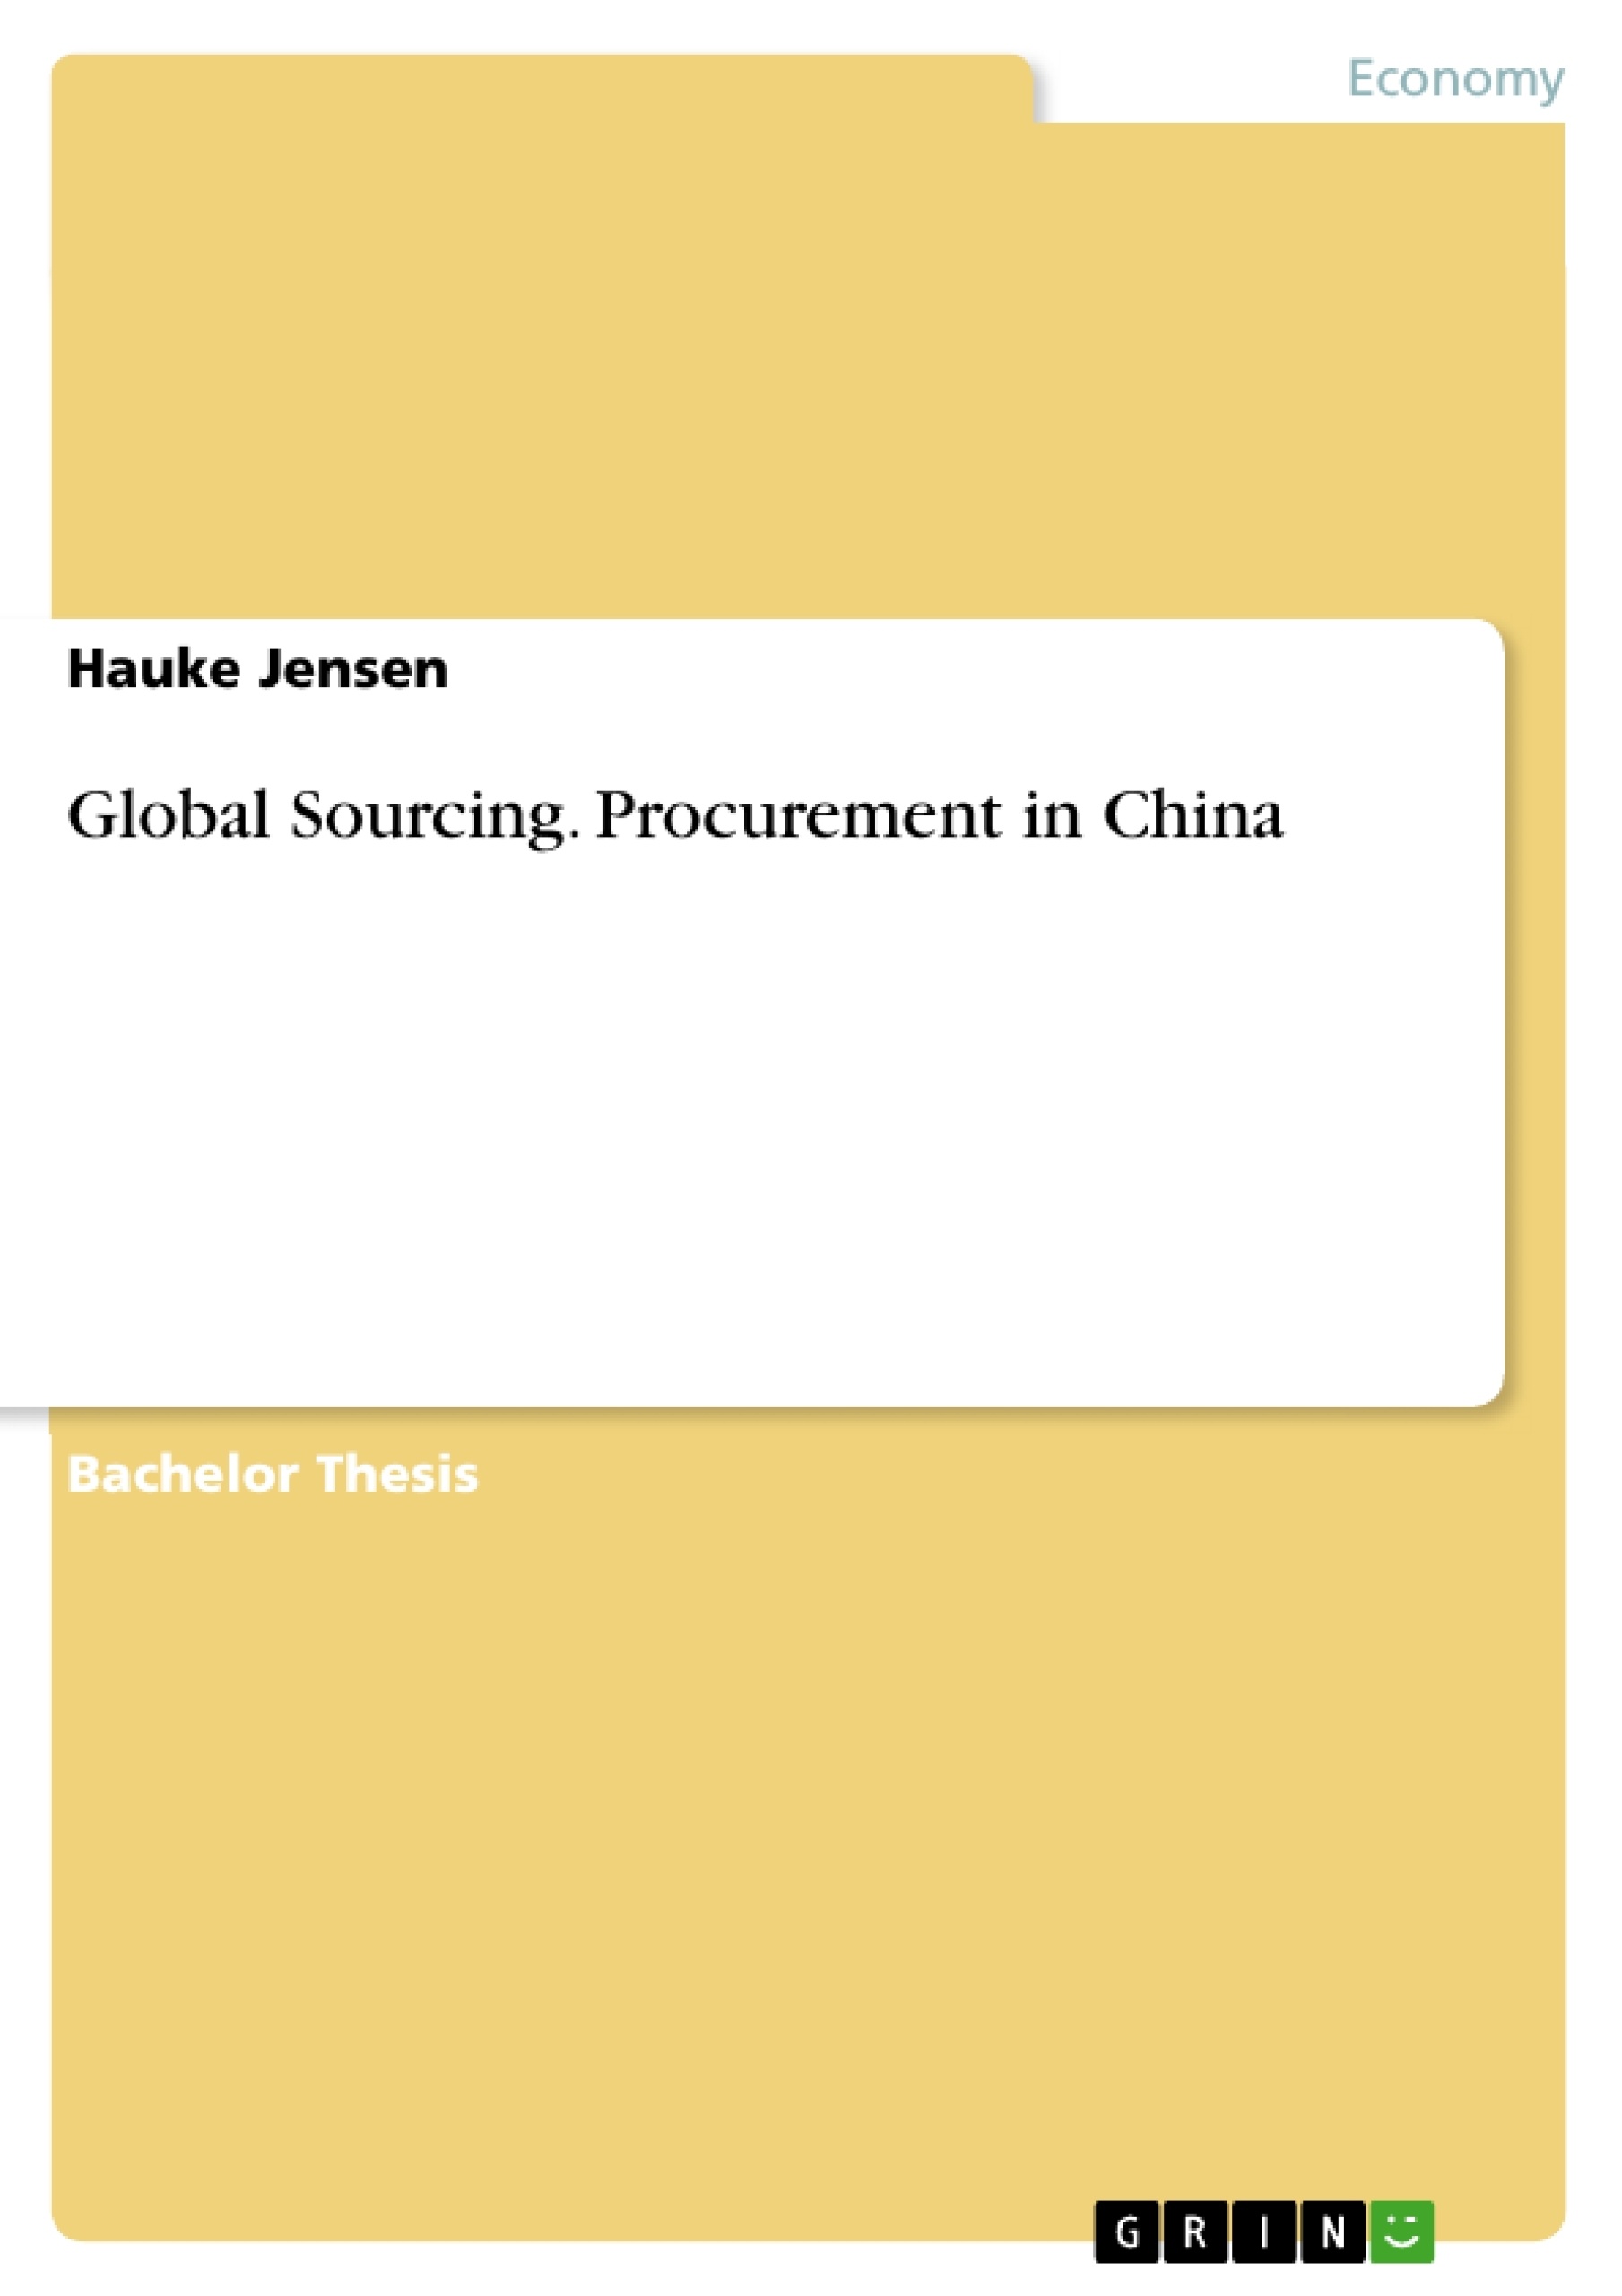 Título: Global Sourcing. Procurement in China